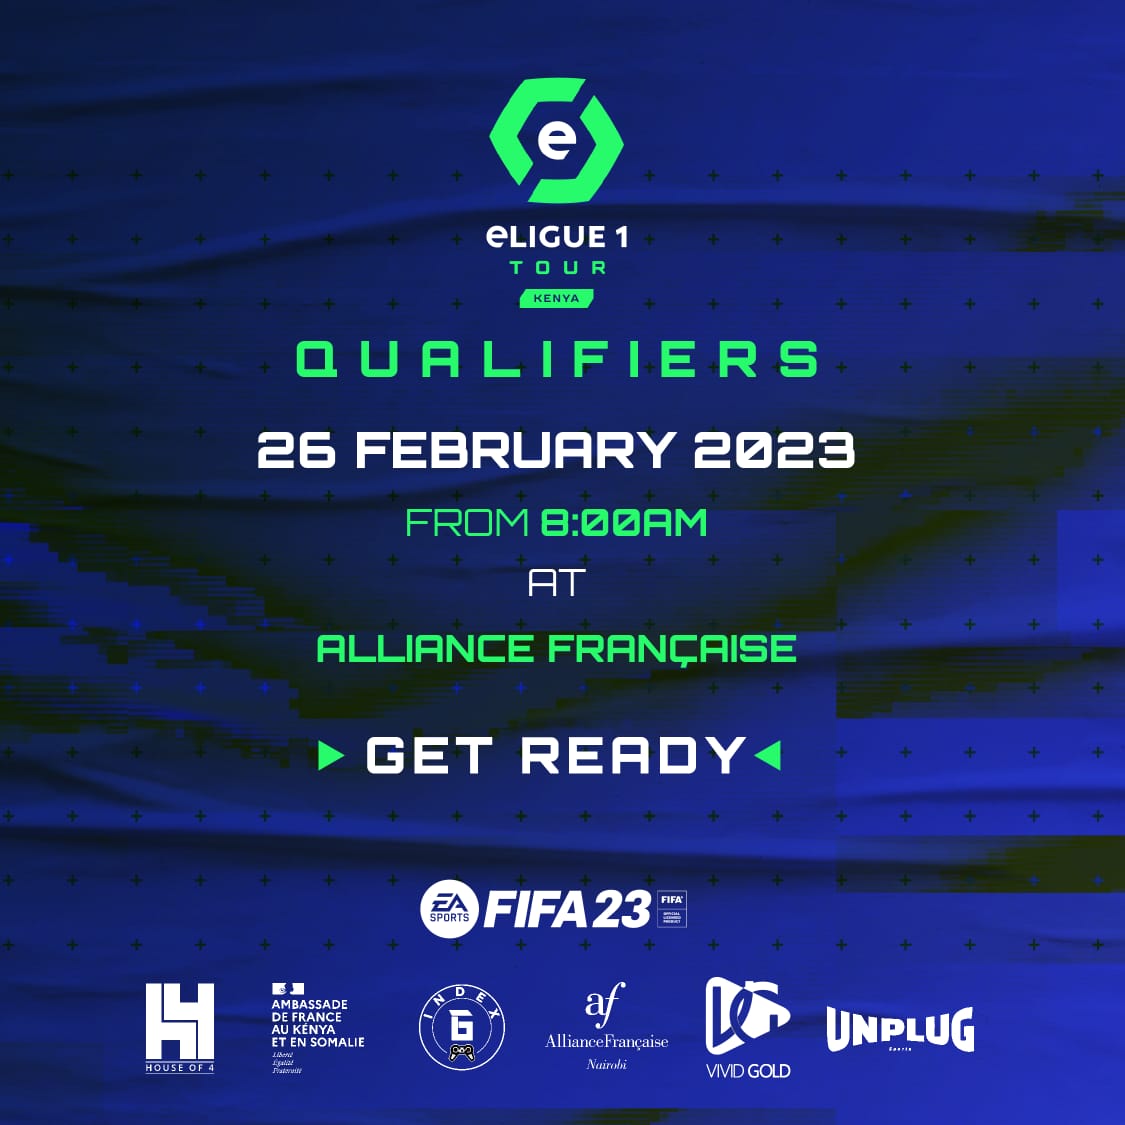 It's almost time! #eLigue1KE qualifiers will be happening this Sunday organised by @indexg courtesy of @Ligue1_ENG. Let's Game!

#eLigue1Tour #esports #fifa23 #gaming